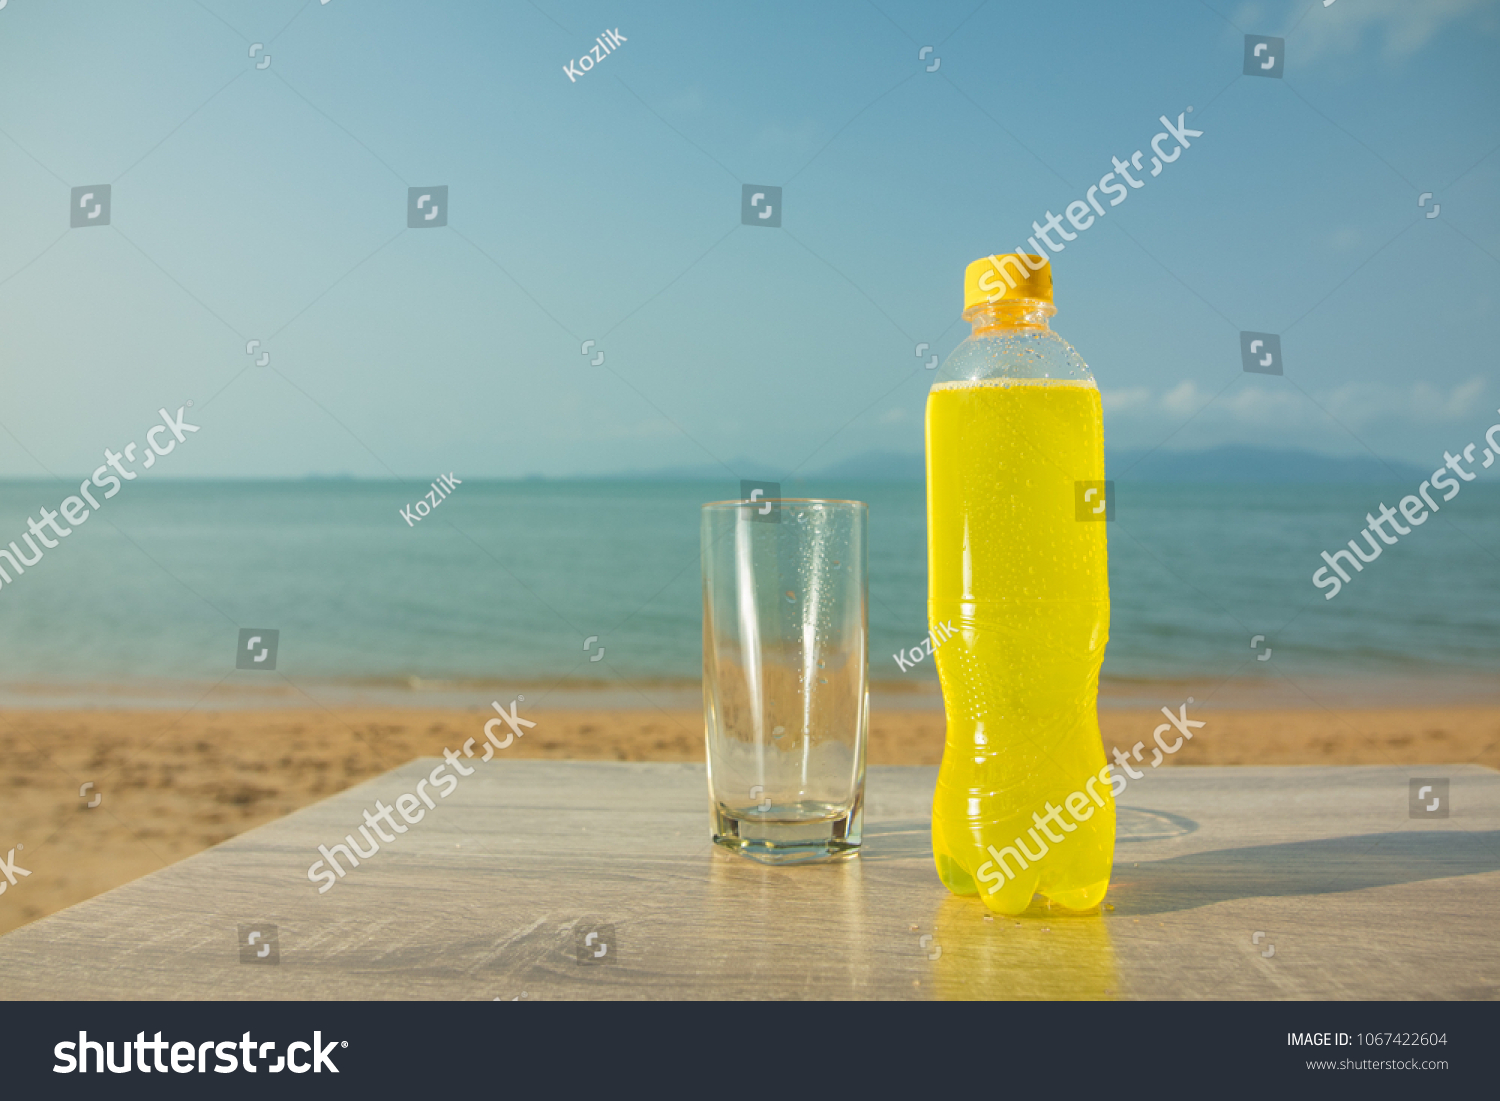 Download Bottles Multicolored Drinks Yellow Red Green Stock Photo Edit Now 1067422604 Yellowimages Mockups